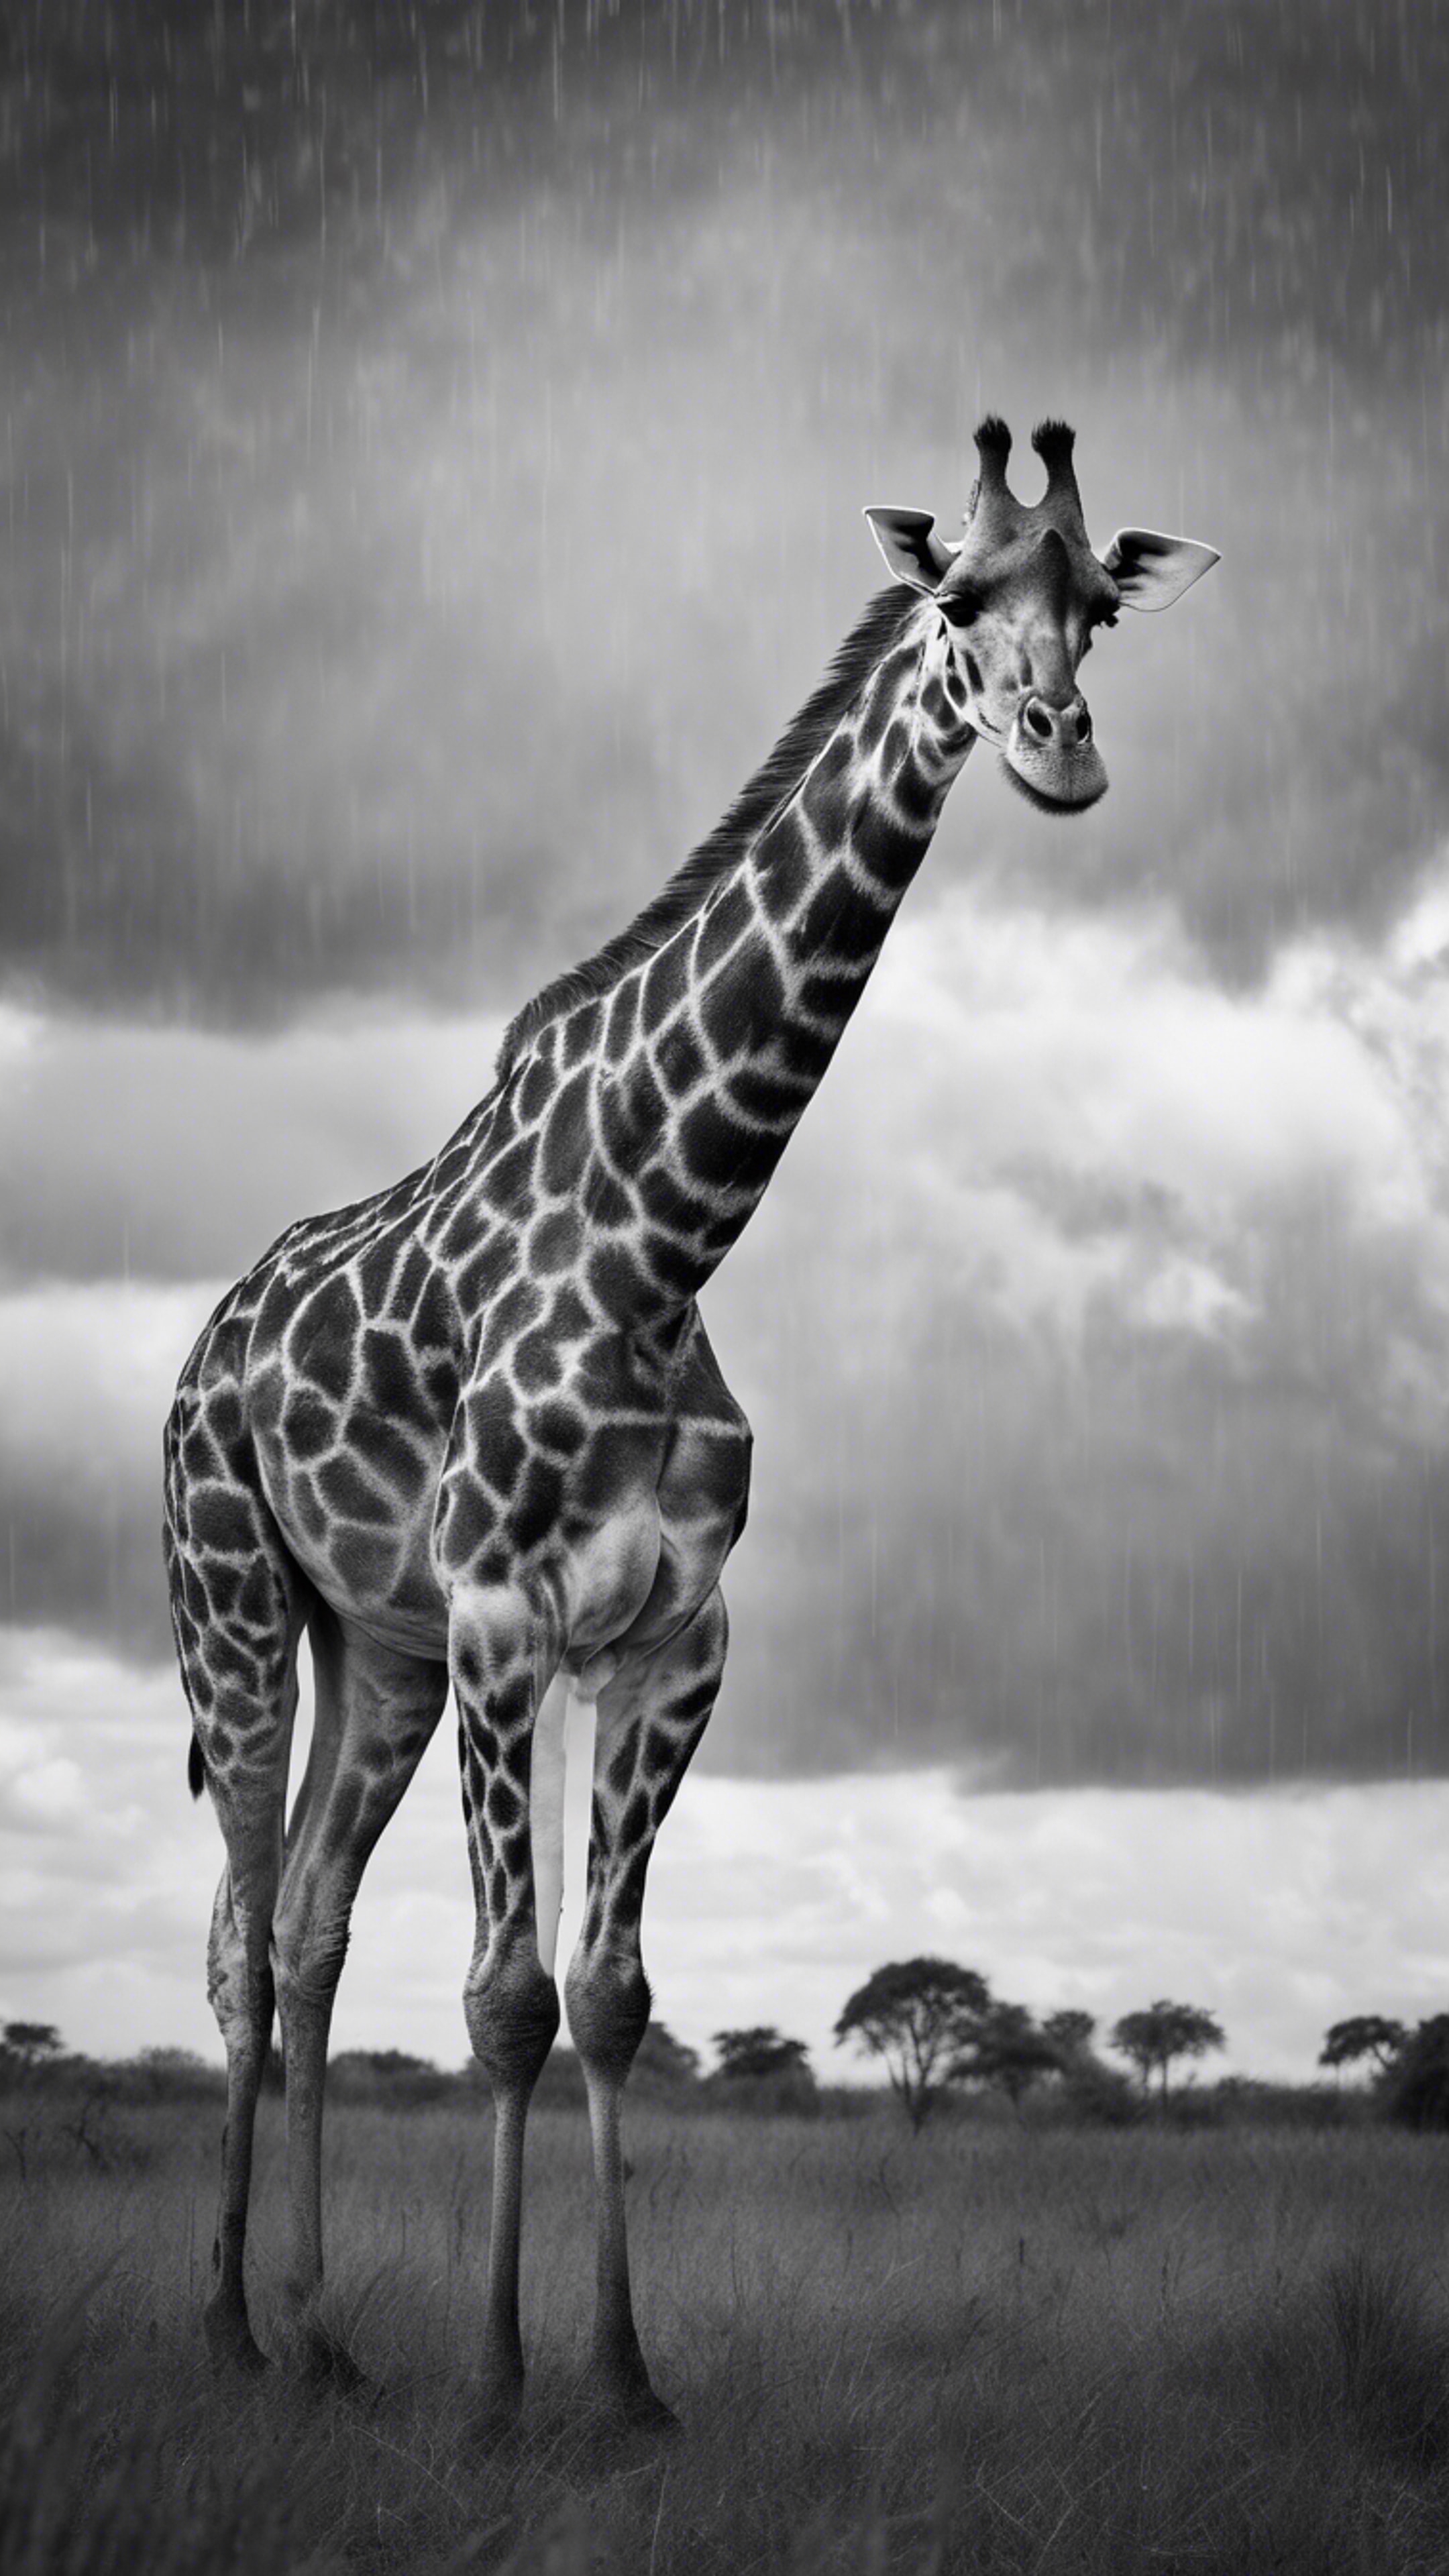 A beautifully photographed black and white image of a giraffe sauntering under rain clouds.壁紙[33f5eecce55b4c40952e]